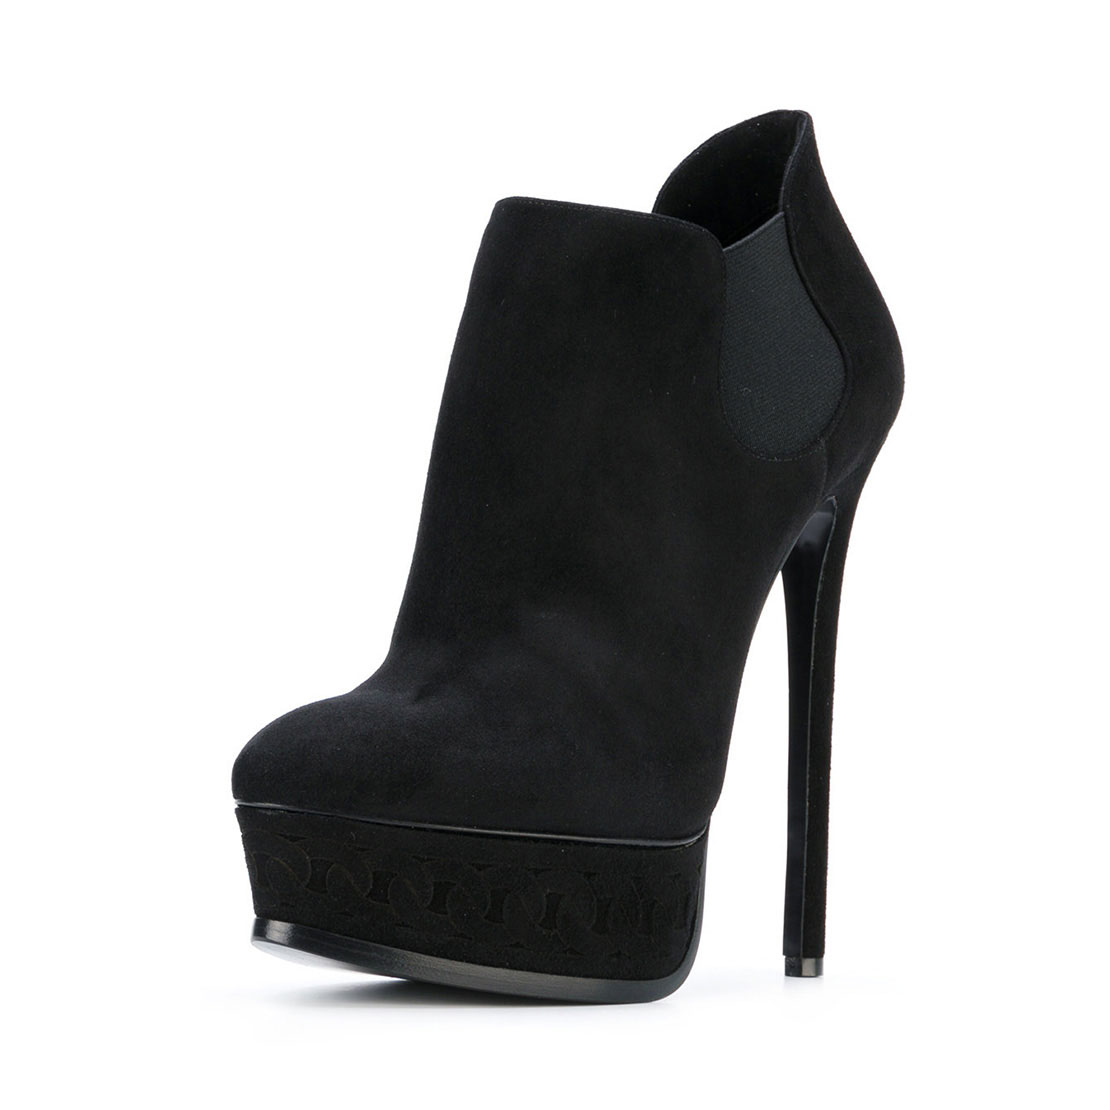 Platform thin high heel women suede leather ankle boots YB3039